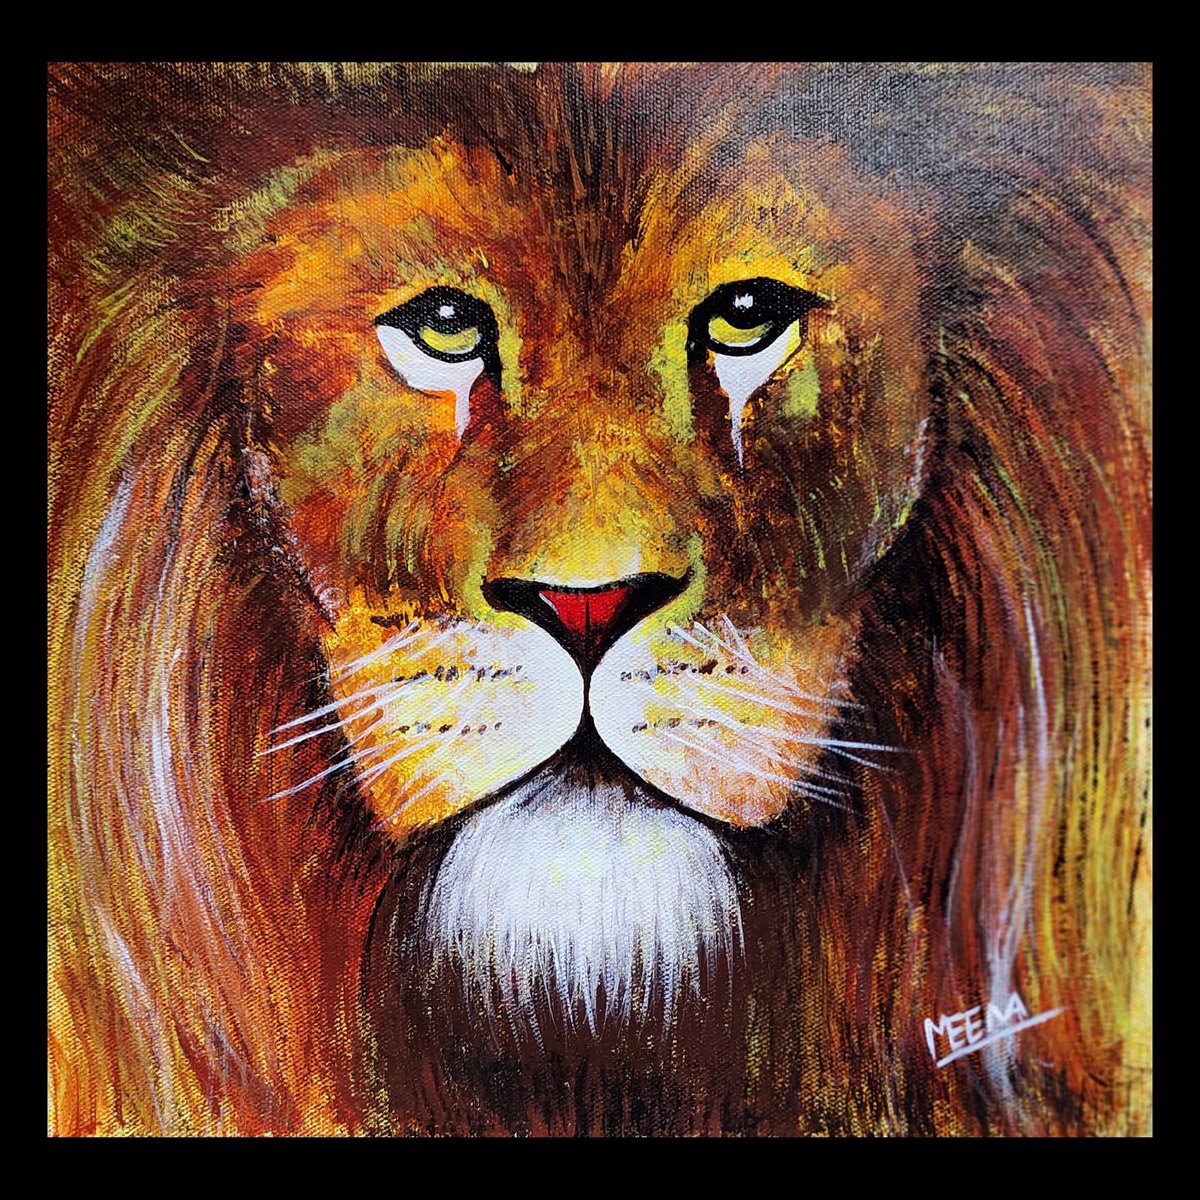 ❣️Acrylic Painting on Canvas🎨🖌️

.
.
➡️size: 11in× 11in
➡️DM for order.
.
.
➡️ #momentum_art_du 
.
.
.
.
.

#art #artist #artistsoninstagram #artwork #instadaily #instaart #paintingoftheday #paintings #lionpainting #draw #Lions